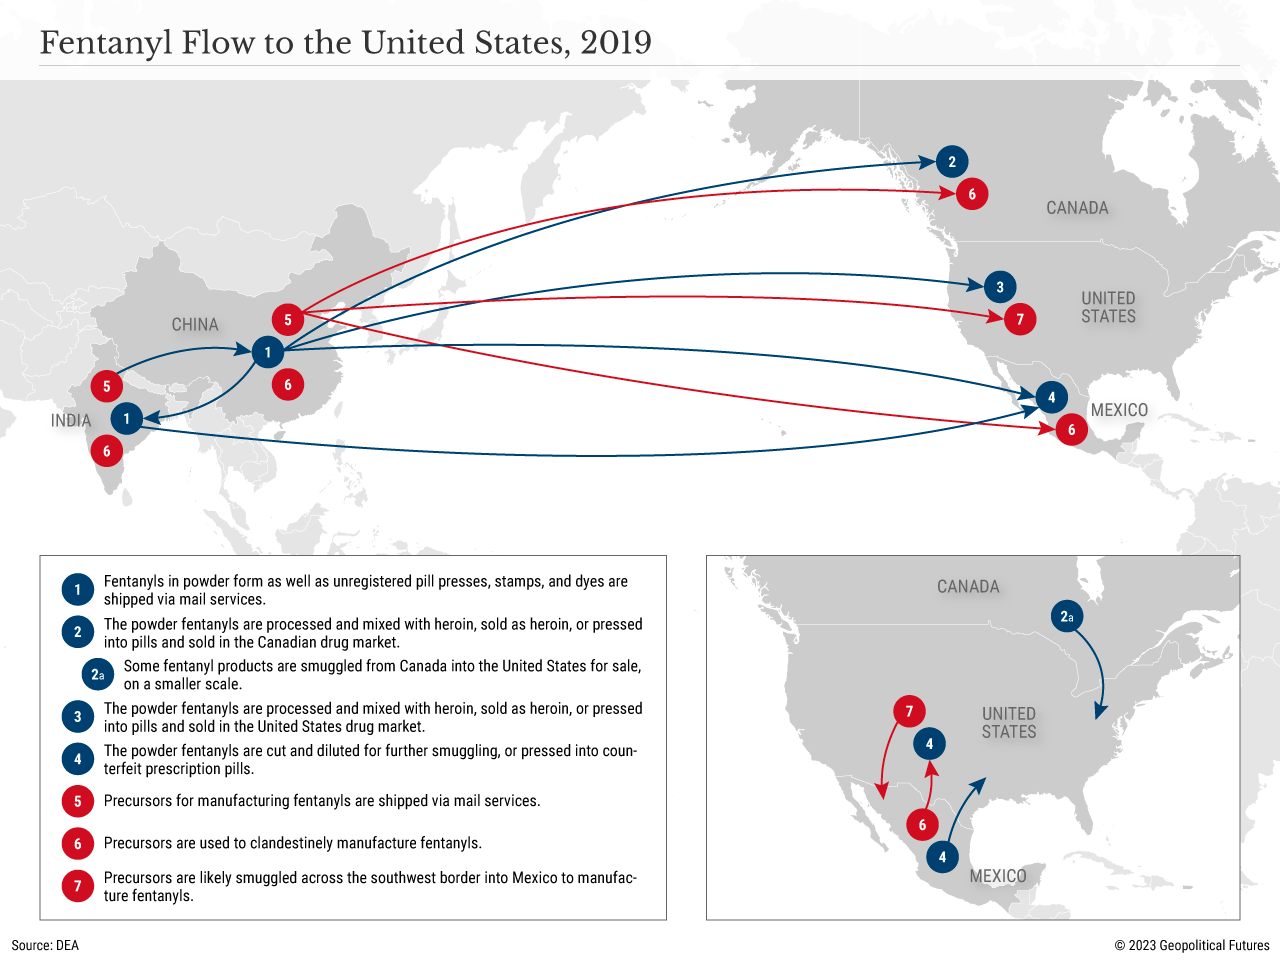 Fentanyl Flow to the United States, 2019